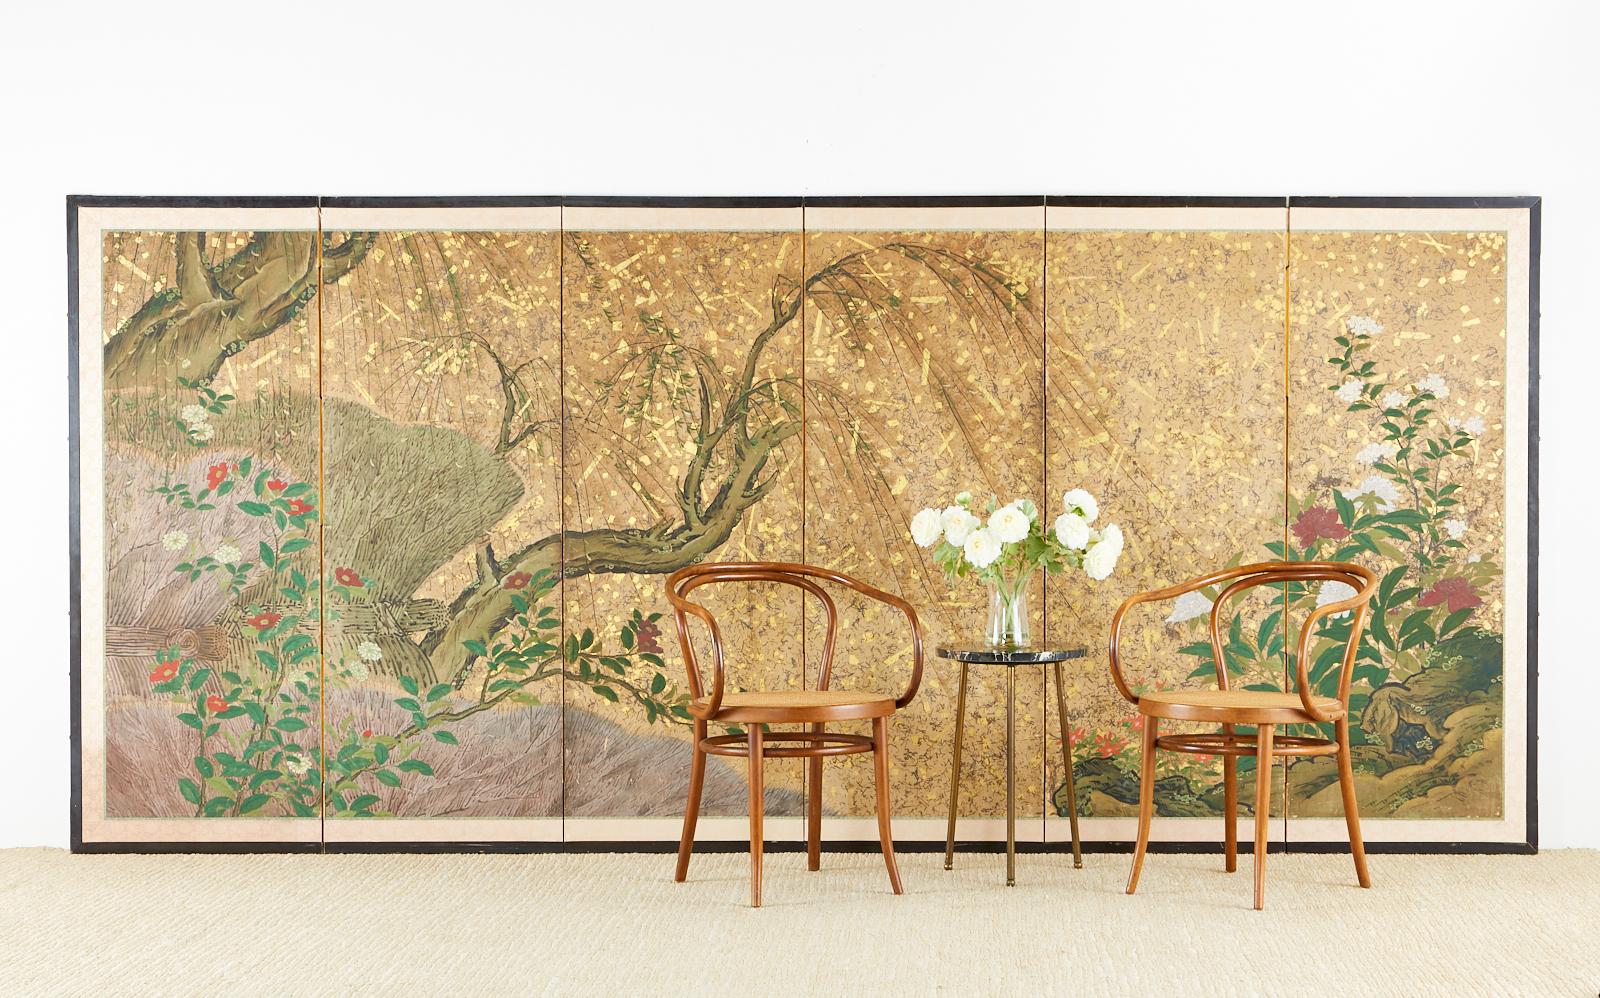 18th century Japanese Edo period six-panel screen featuring spring willow with camellia and peonies in a dramatic storm of silver and gold leaf flecks. Made in the Hasegawa school style with various sizes of silver and gold flecks appearing like a